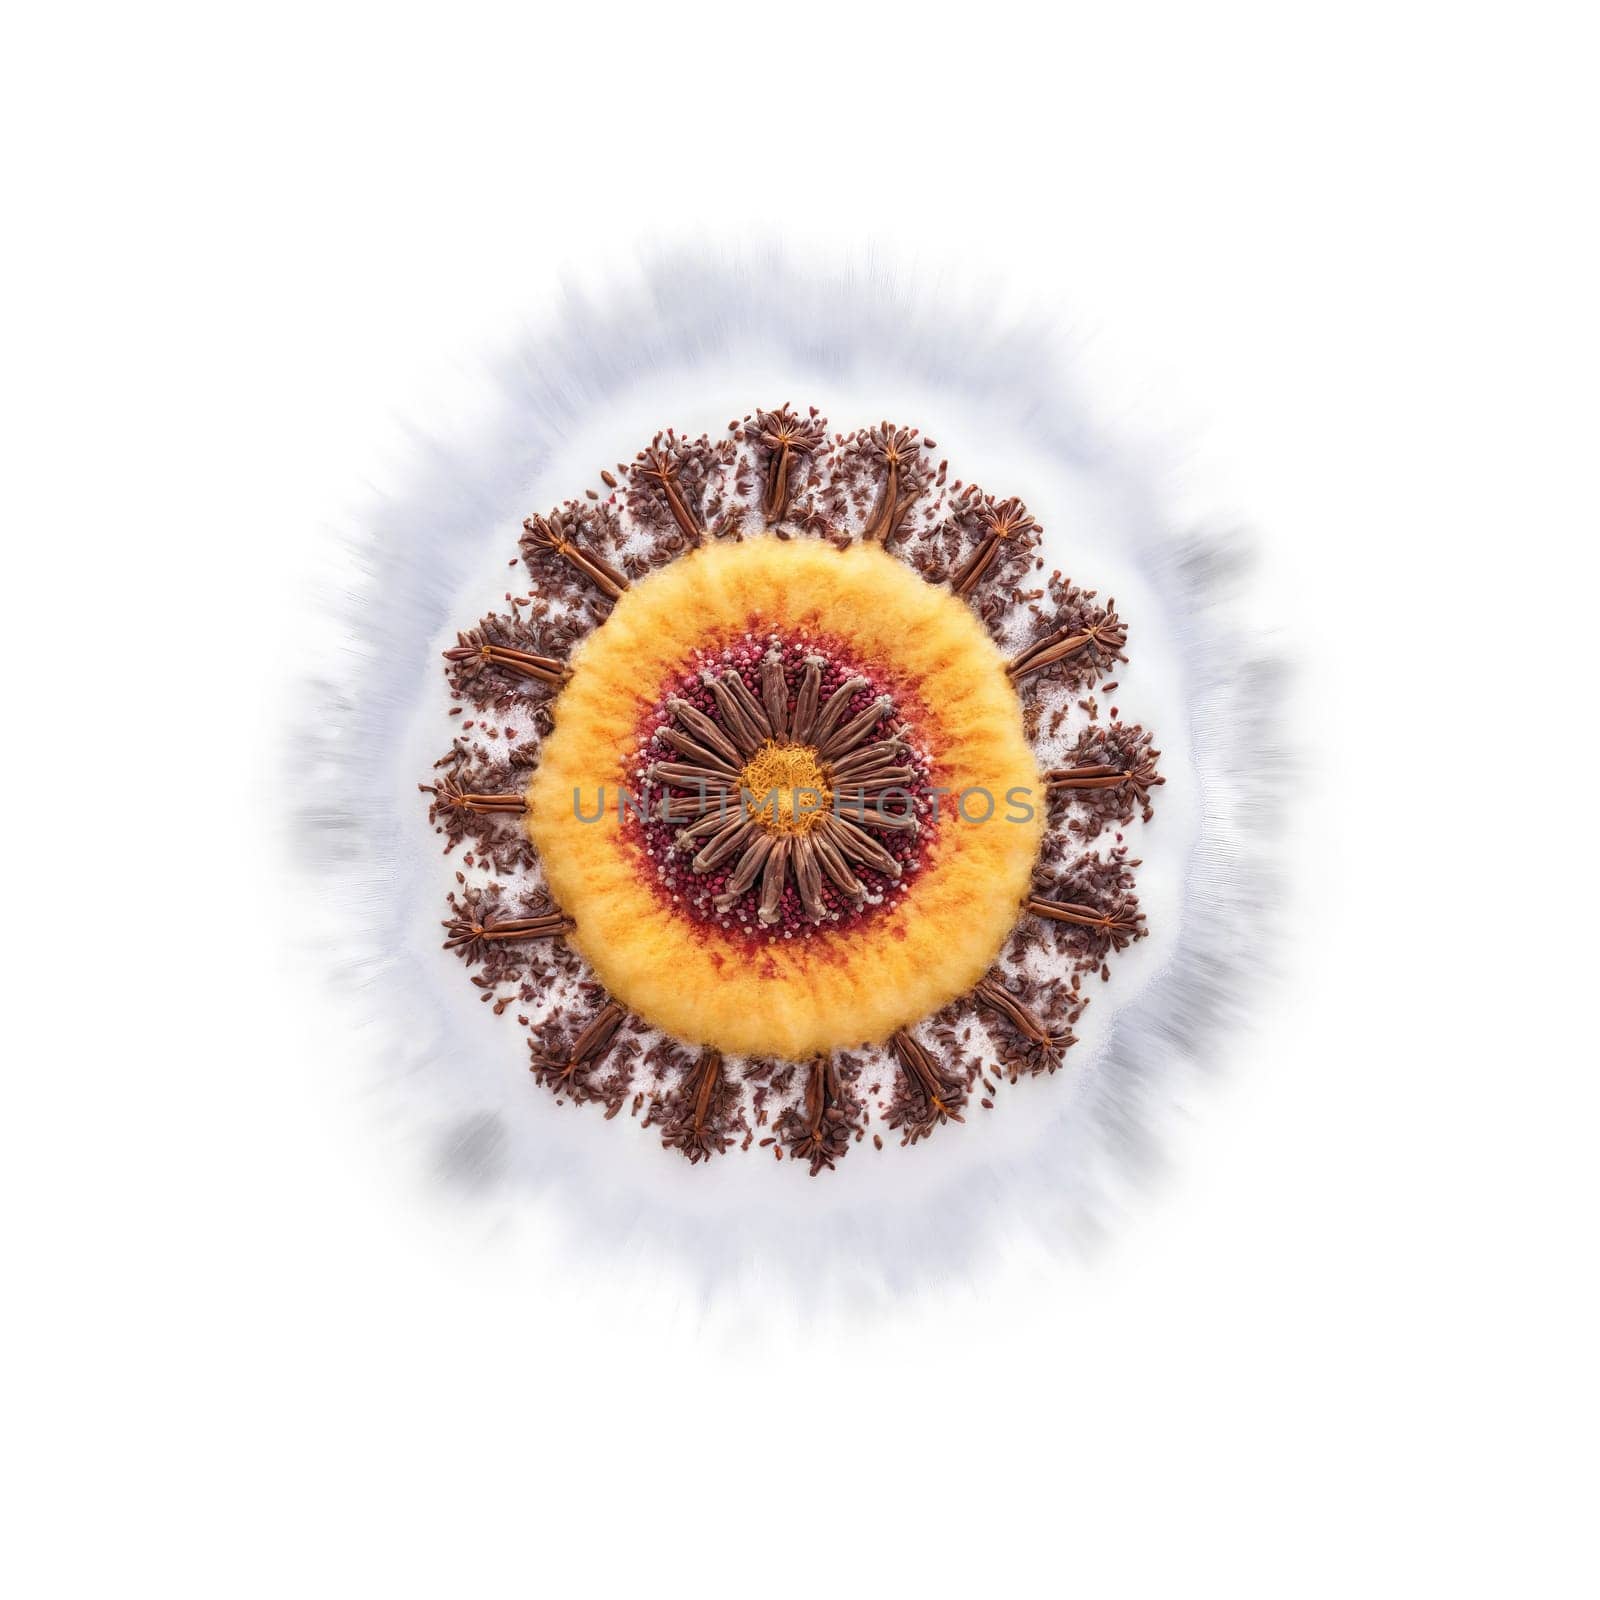 Clove mandala a pungent mandala of cloves with powder dusting and steam rising. Food isolated on transparent background.